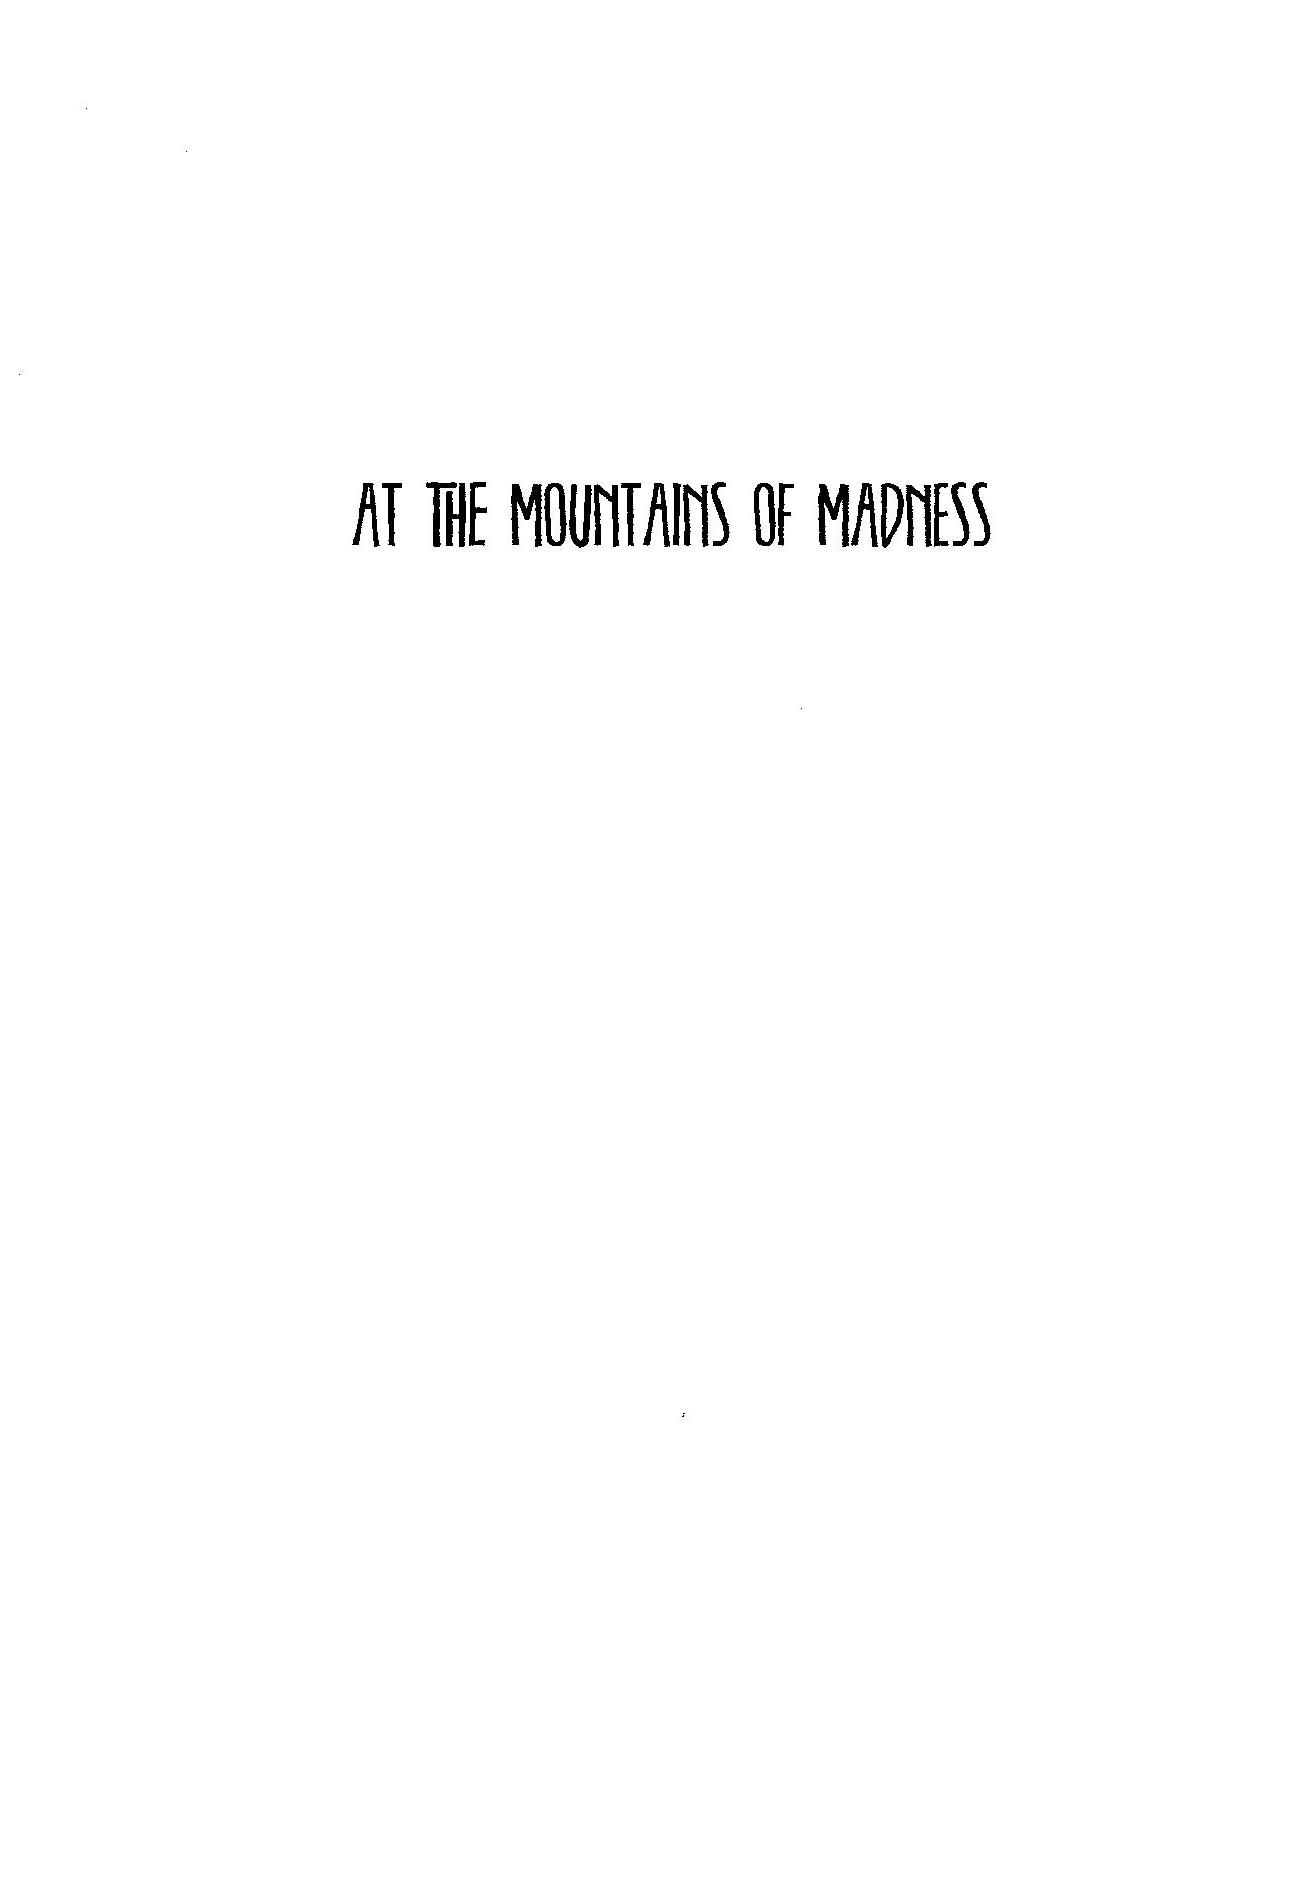 Read online At the Mountains of Madness comic -  Issue # Full - 3